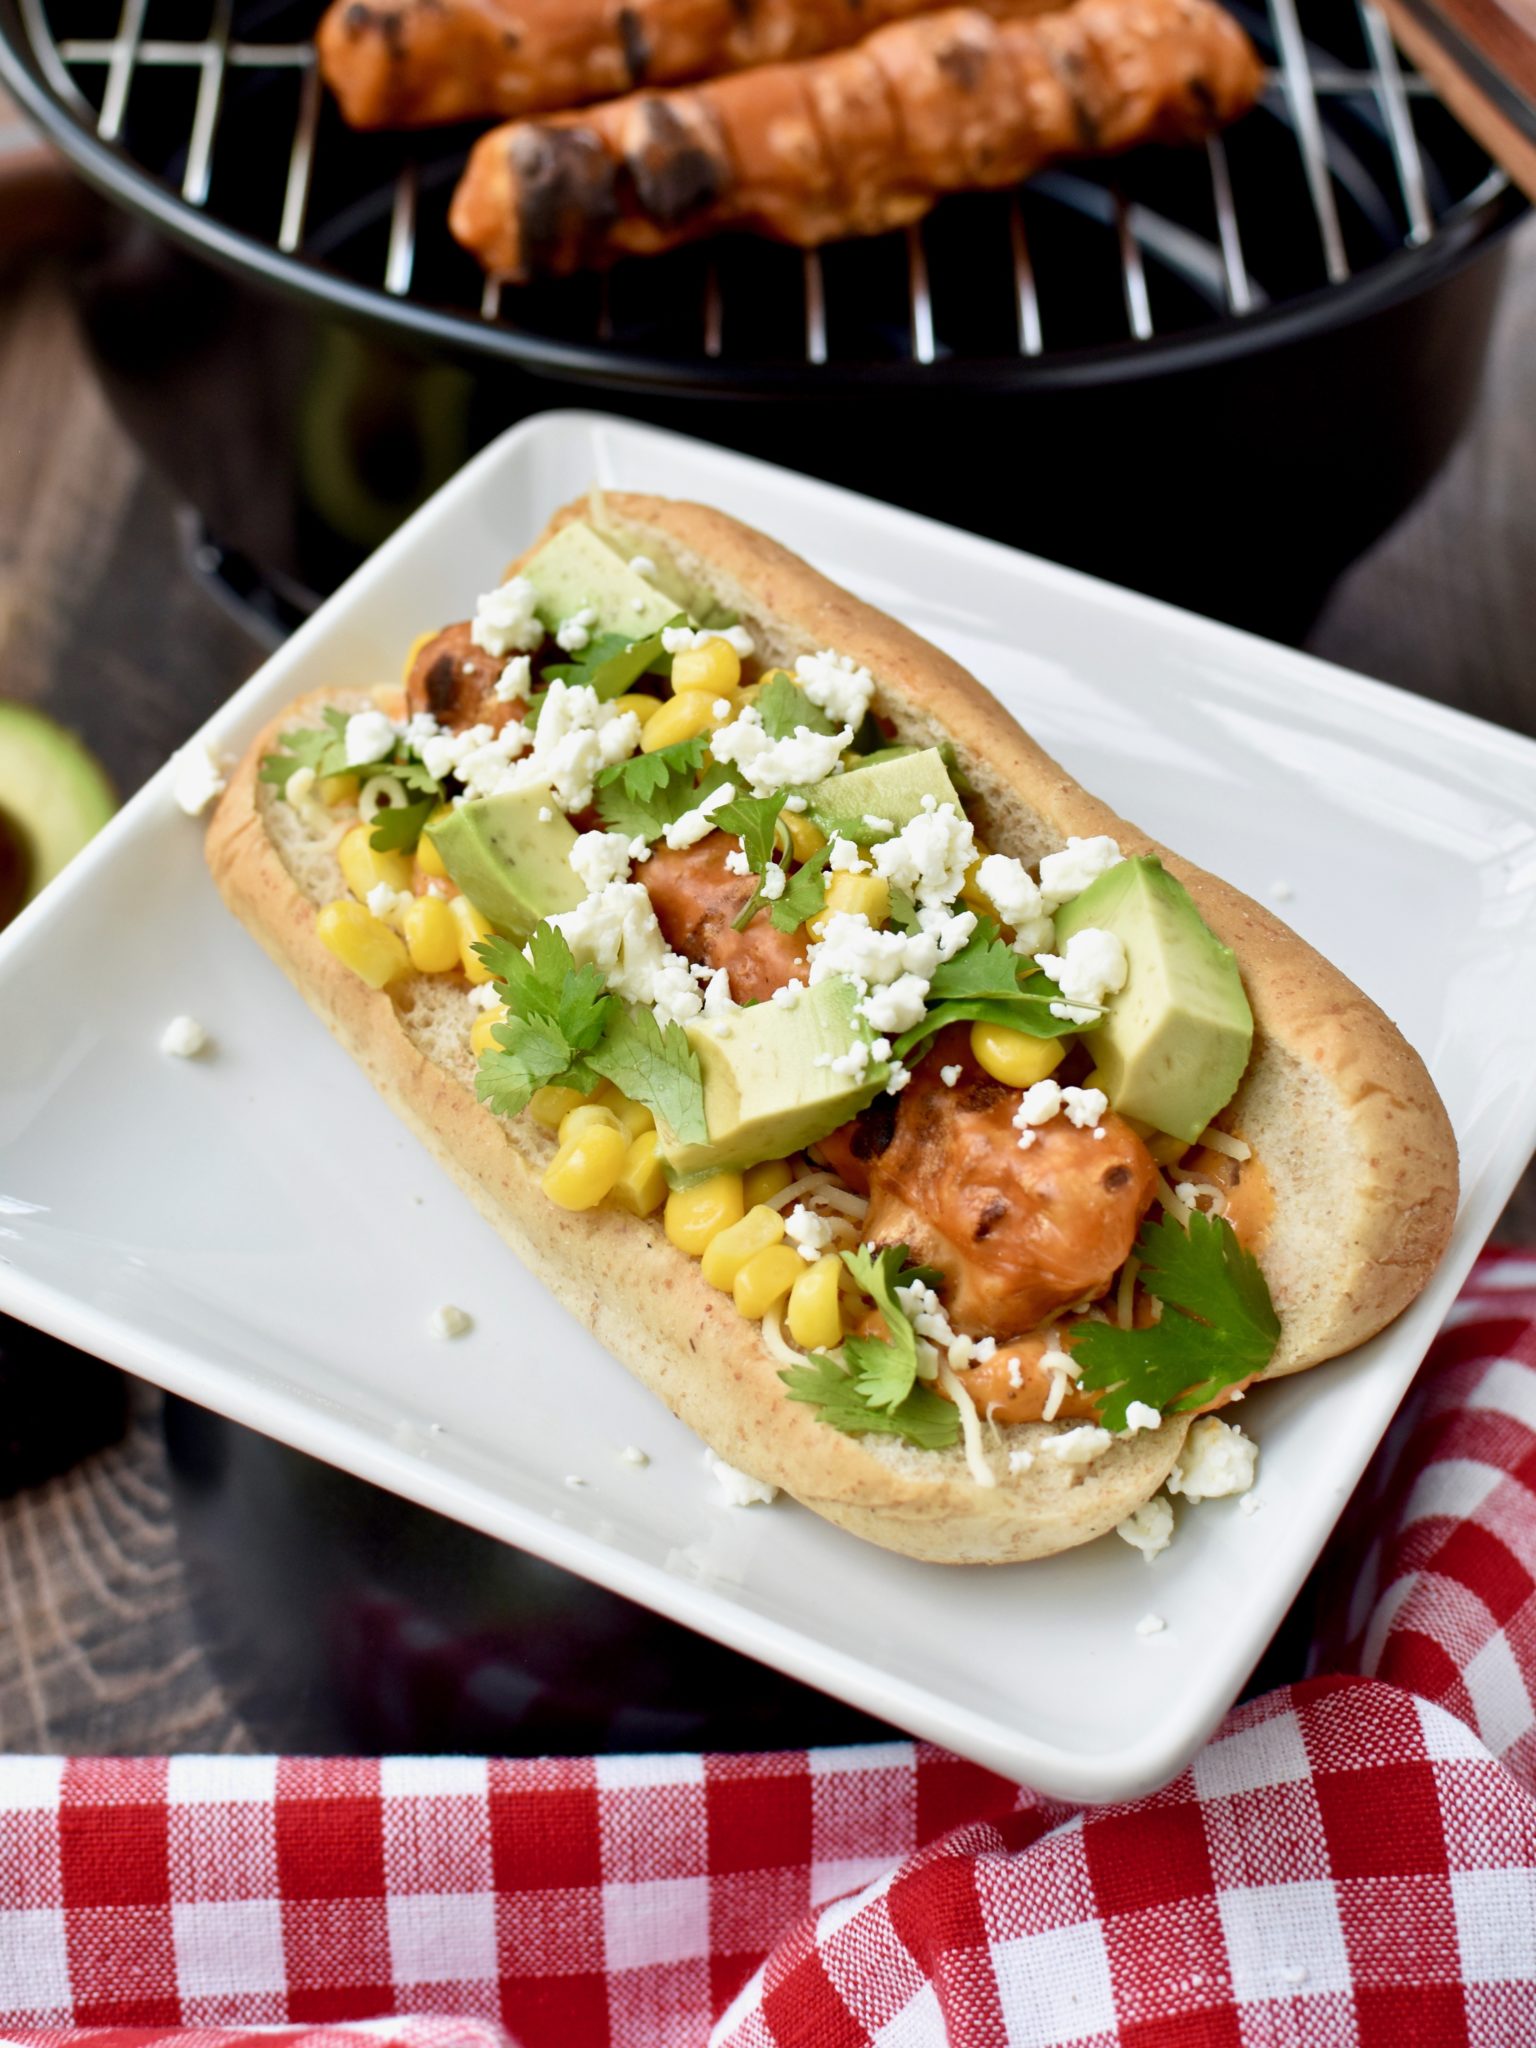 grilling season is here and i'm bringing you 3 fun ways to jazz up veggie dogs! // cait's plate